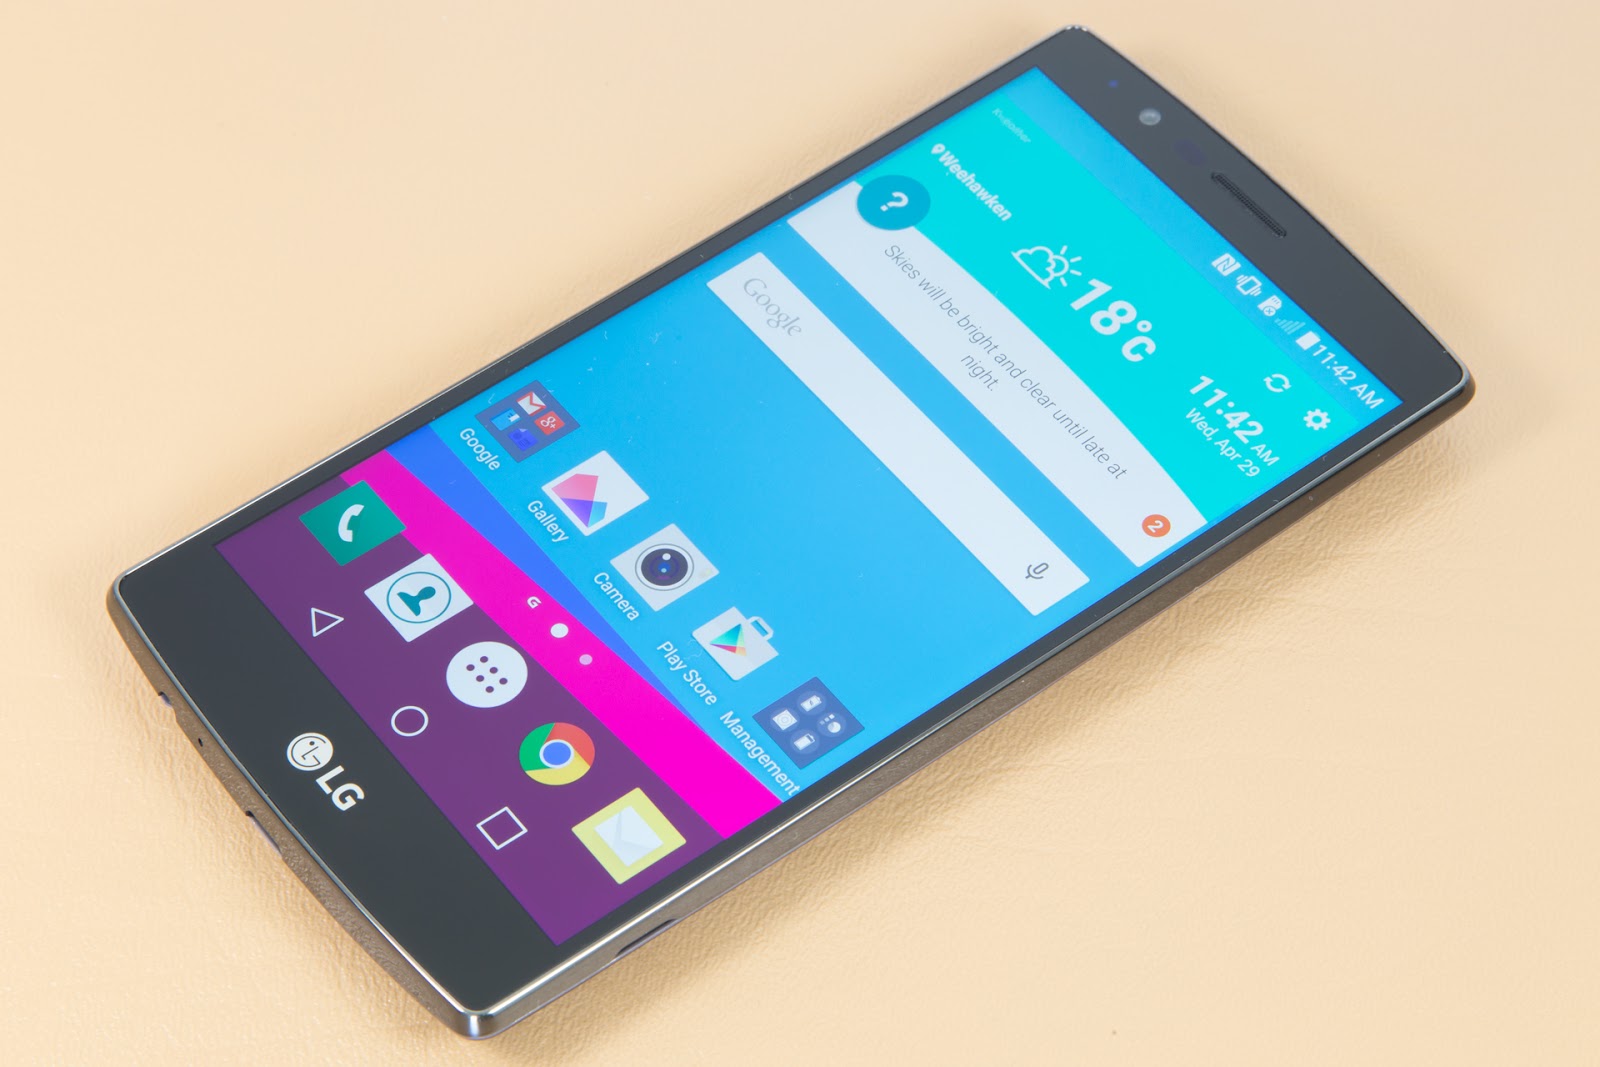 T-Mobile LG G4 seems to be receiving Android 6.0 Marshmallow update